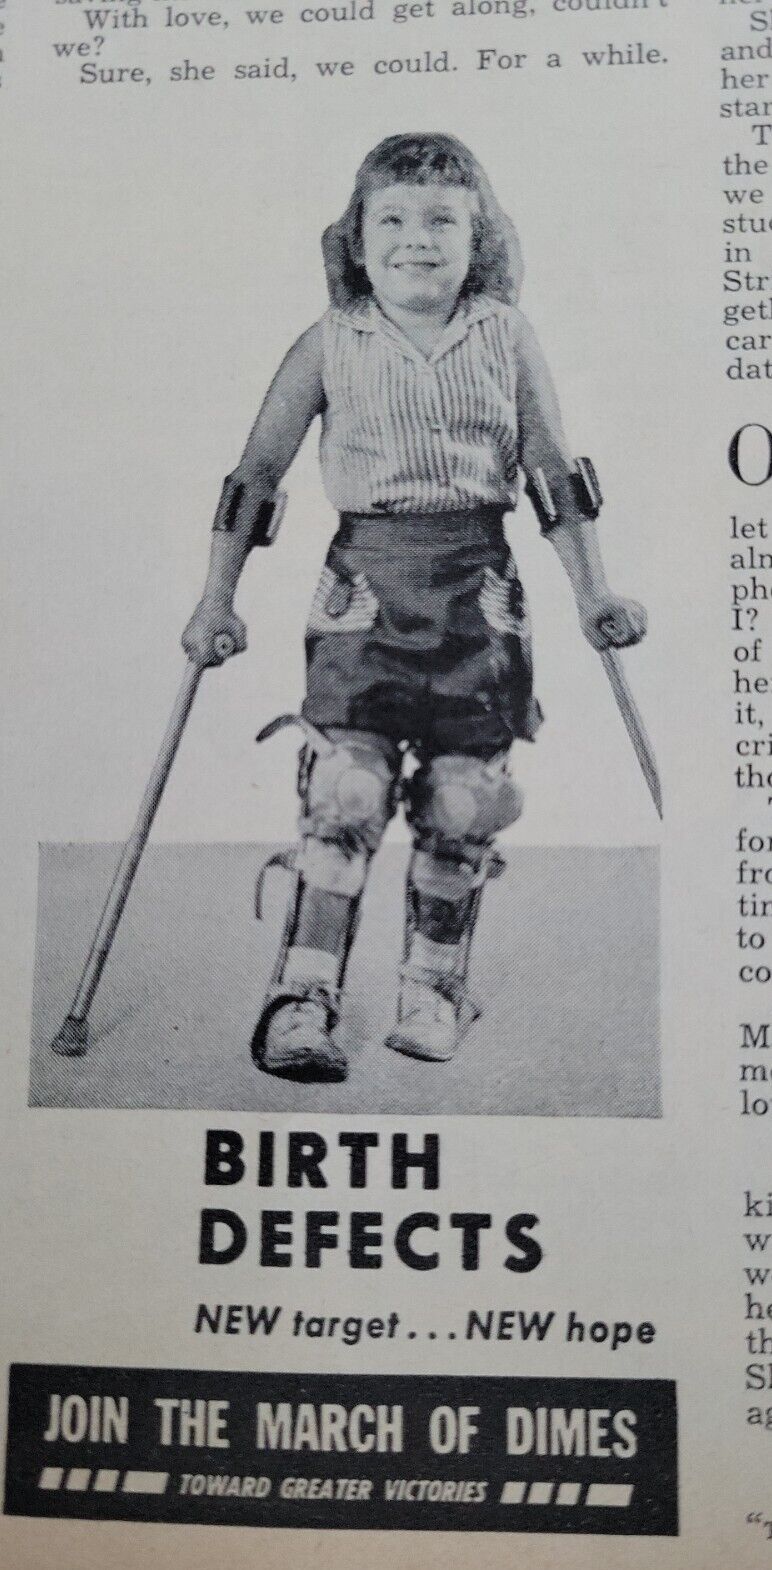 1959 March of dimes birth defects little girl crutches Vintage ad